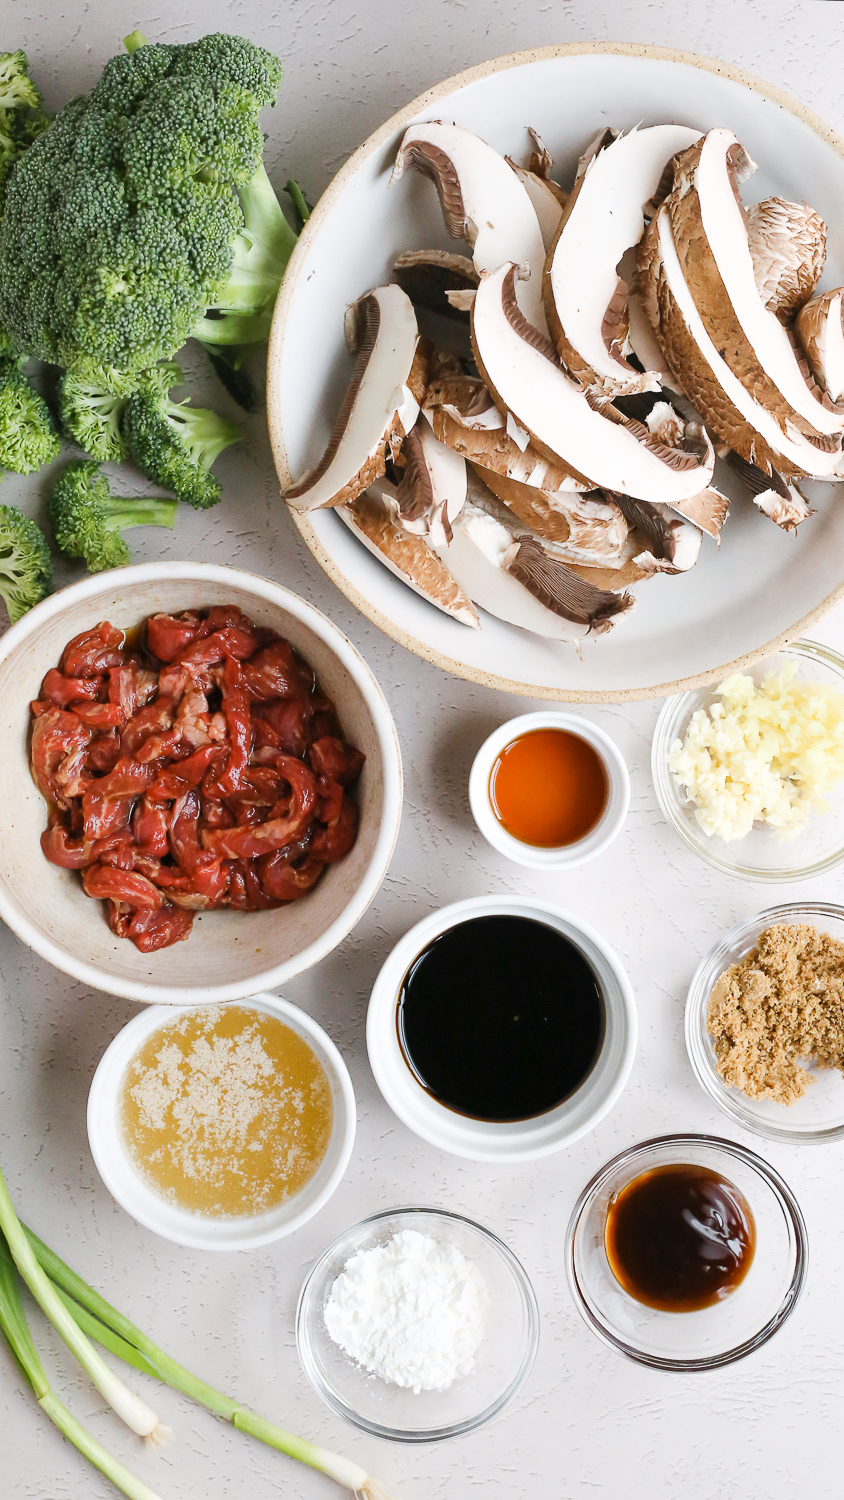 Display of ingredients needed to make an easy beef and broccoli recipe with mushrooms